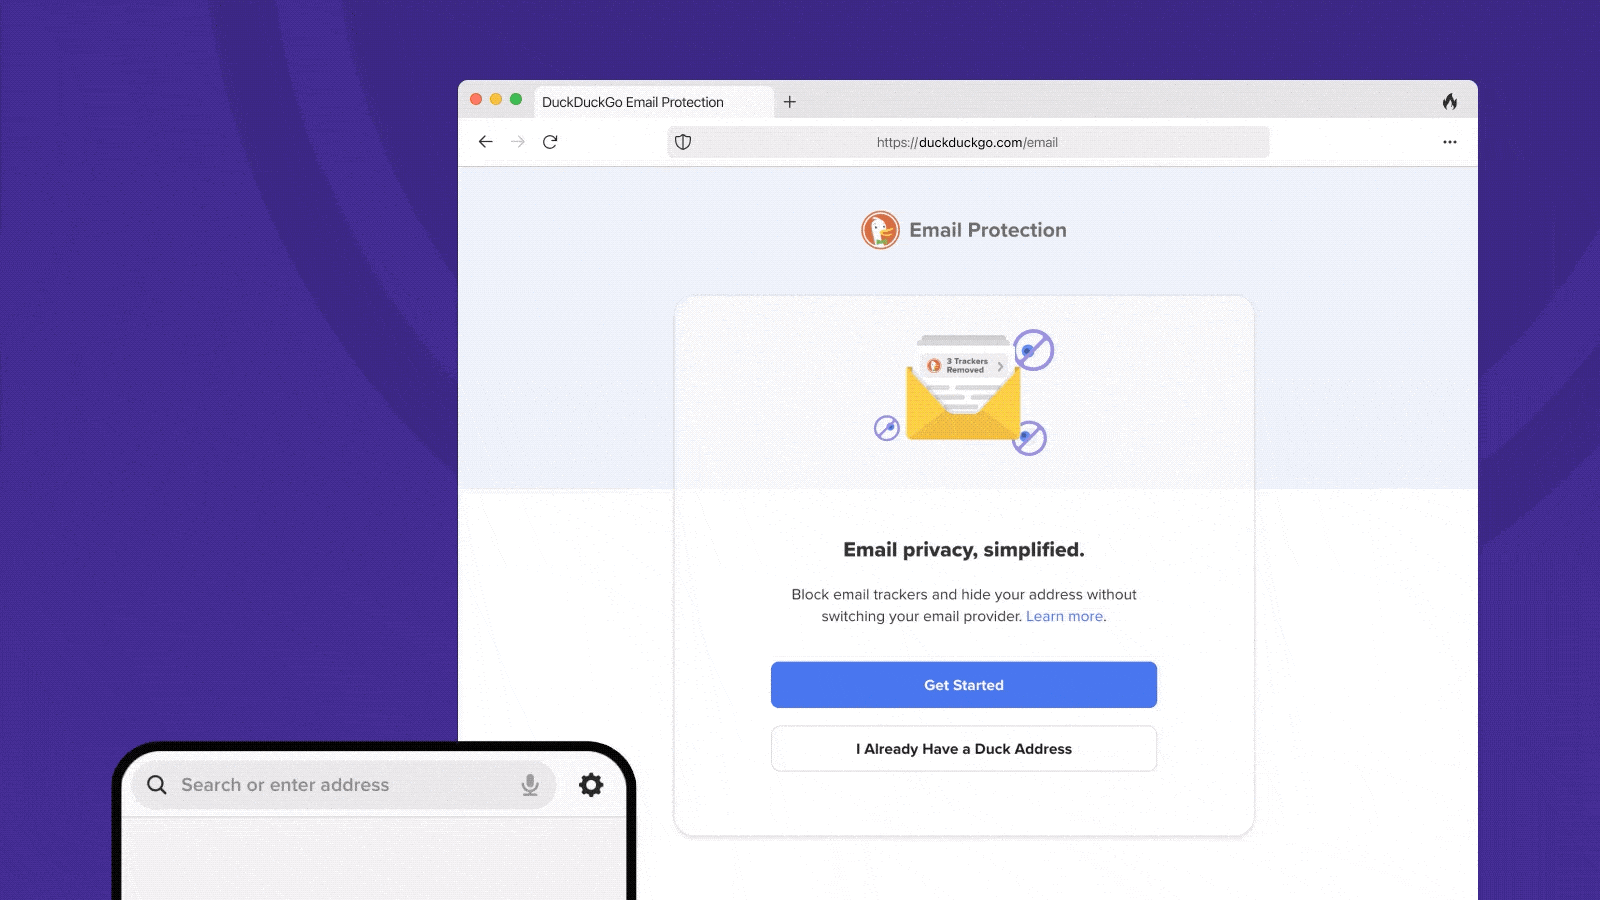 A GIF showing you how to sign up for DuckDuckGo Email Protection